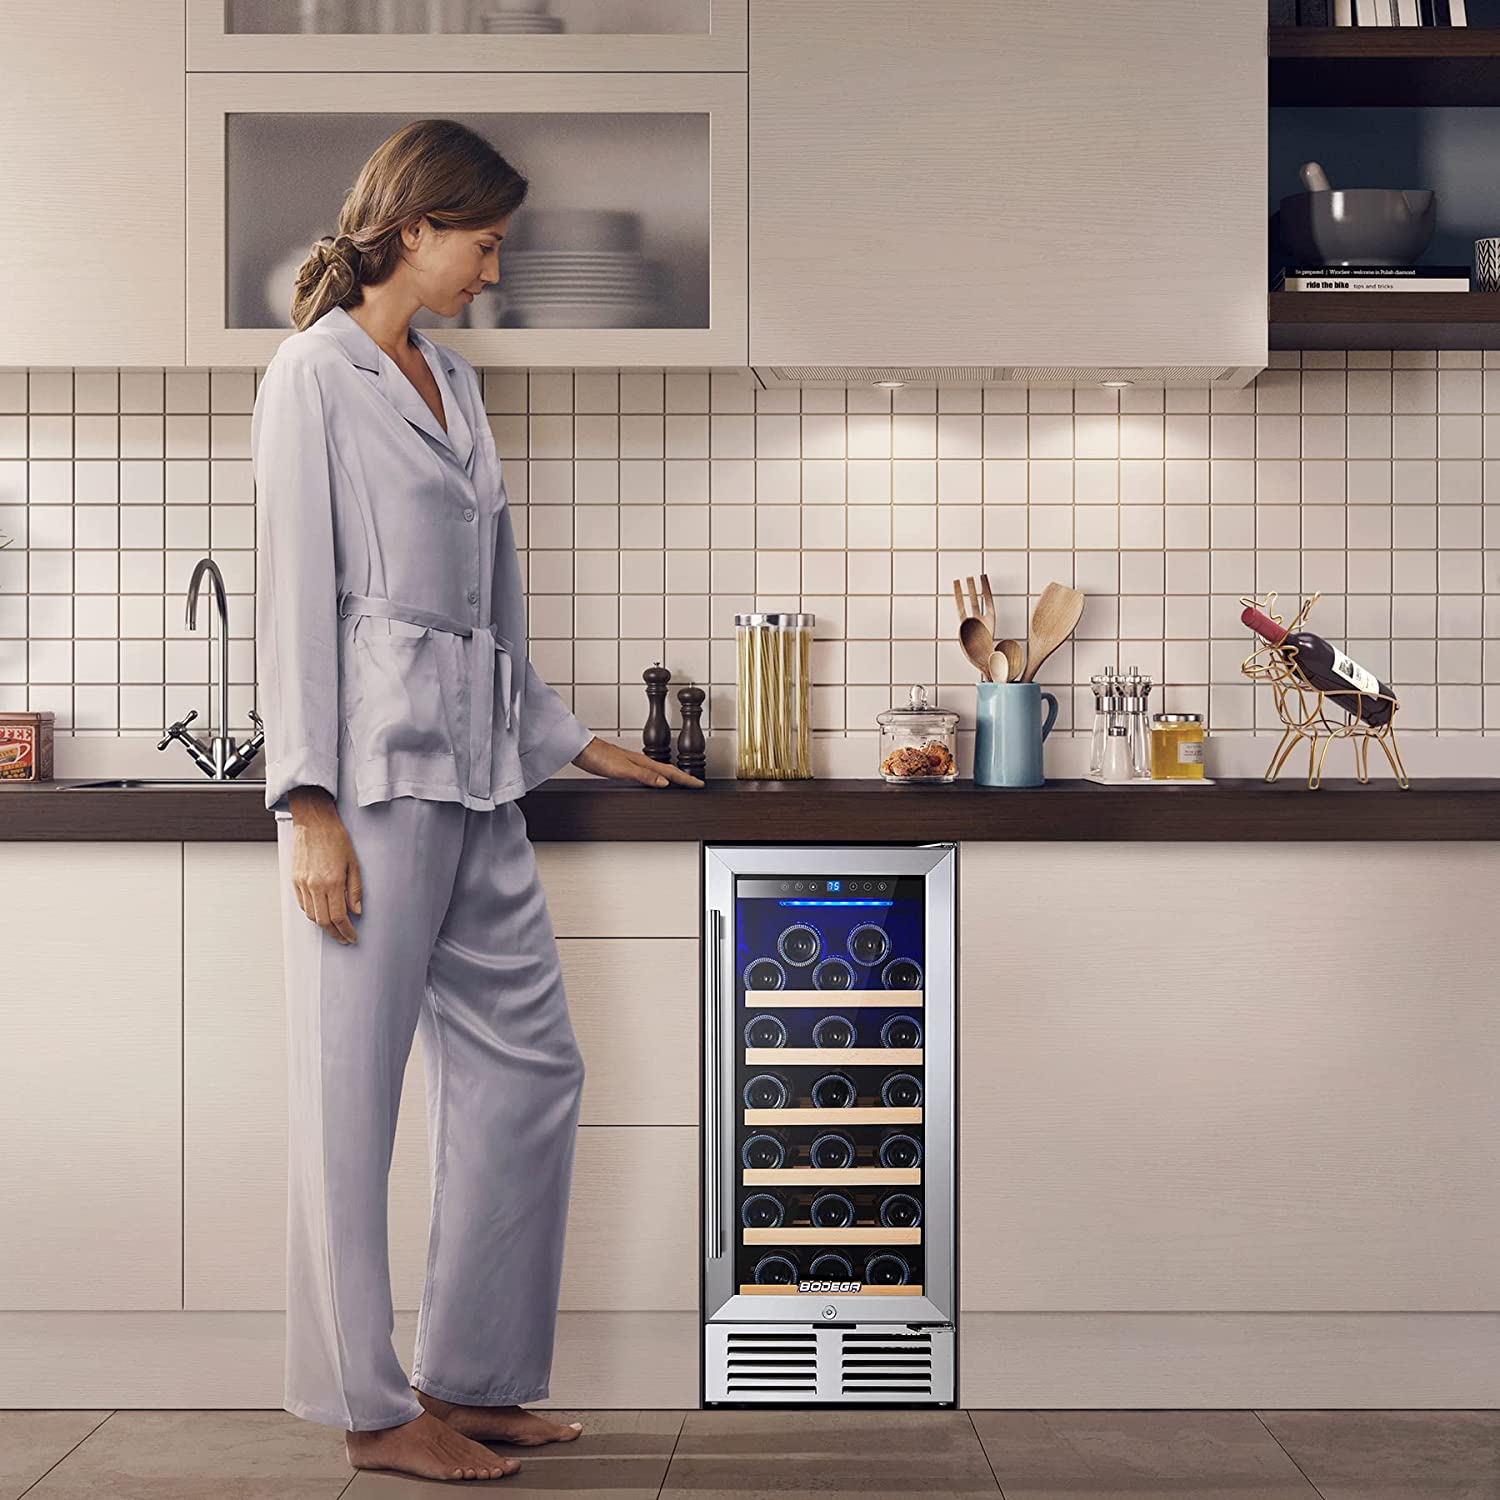 A wine fridge with a compressor cooling system and a digital temperature display